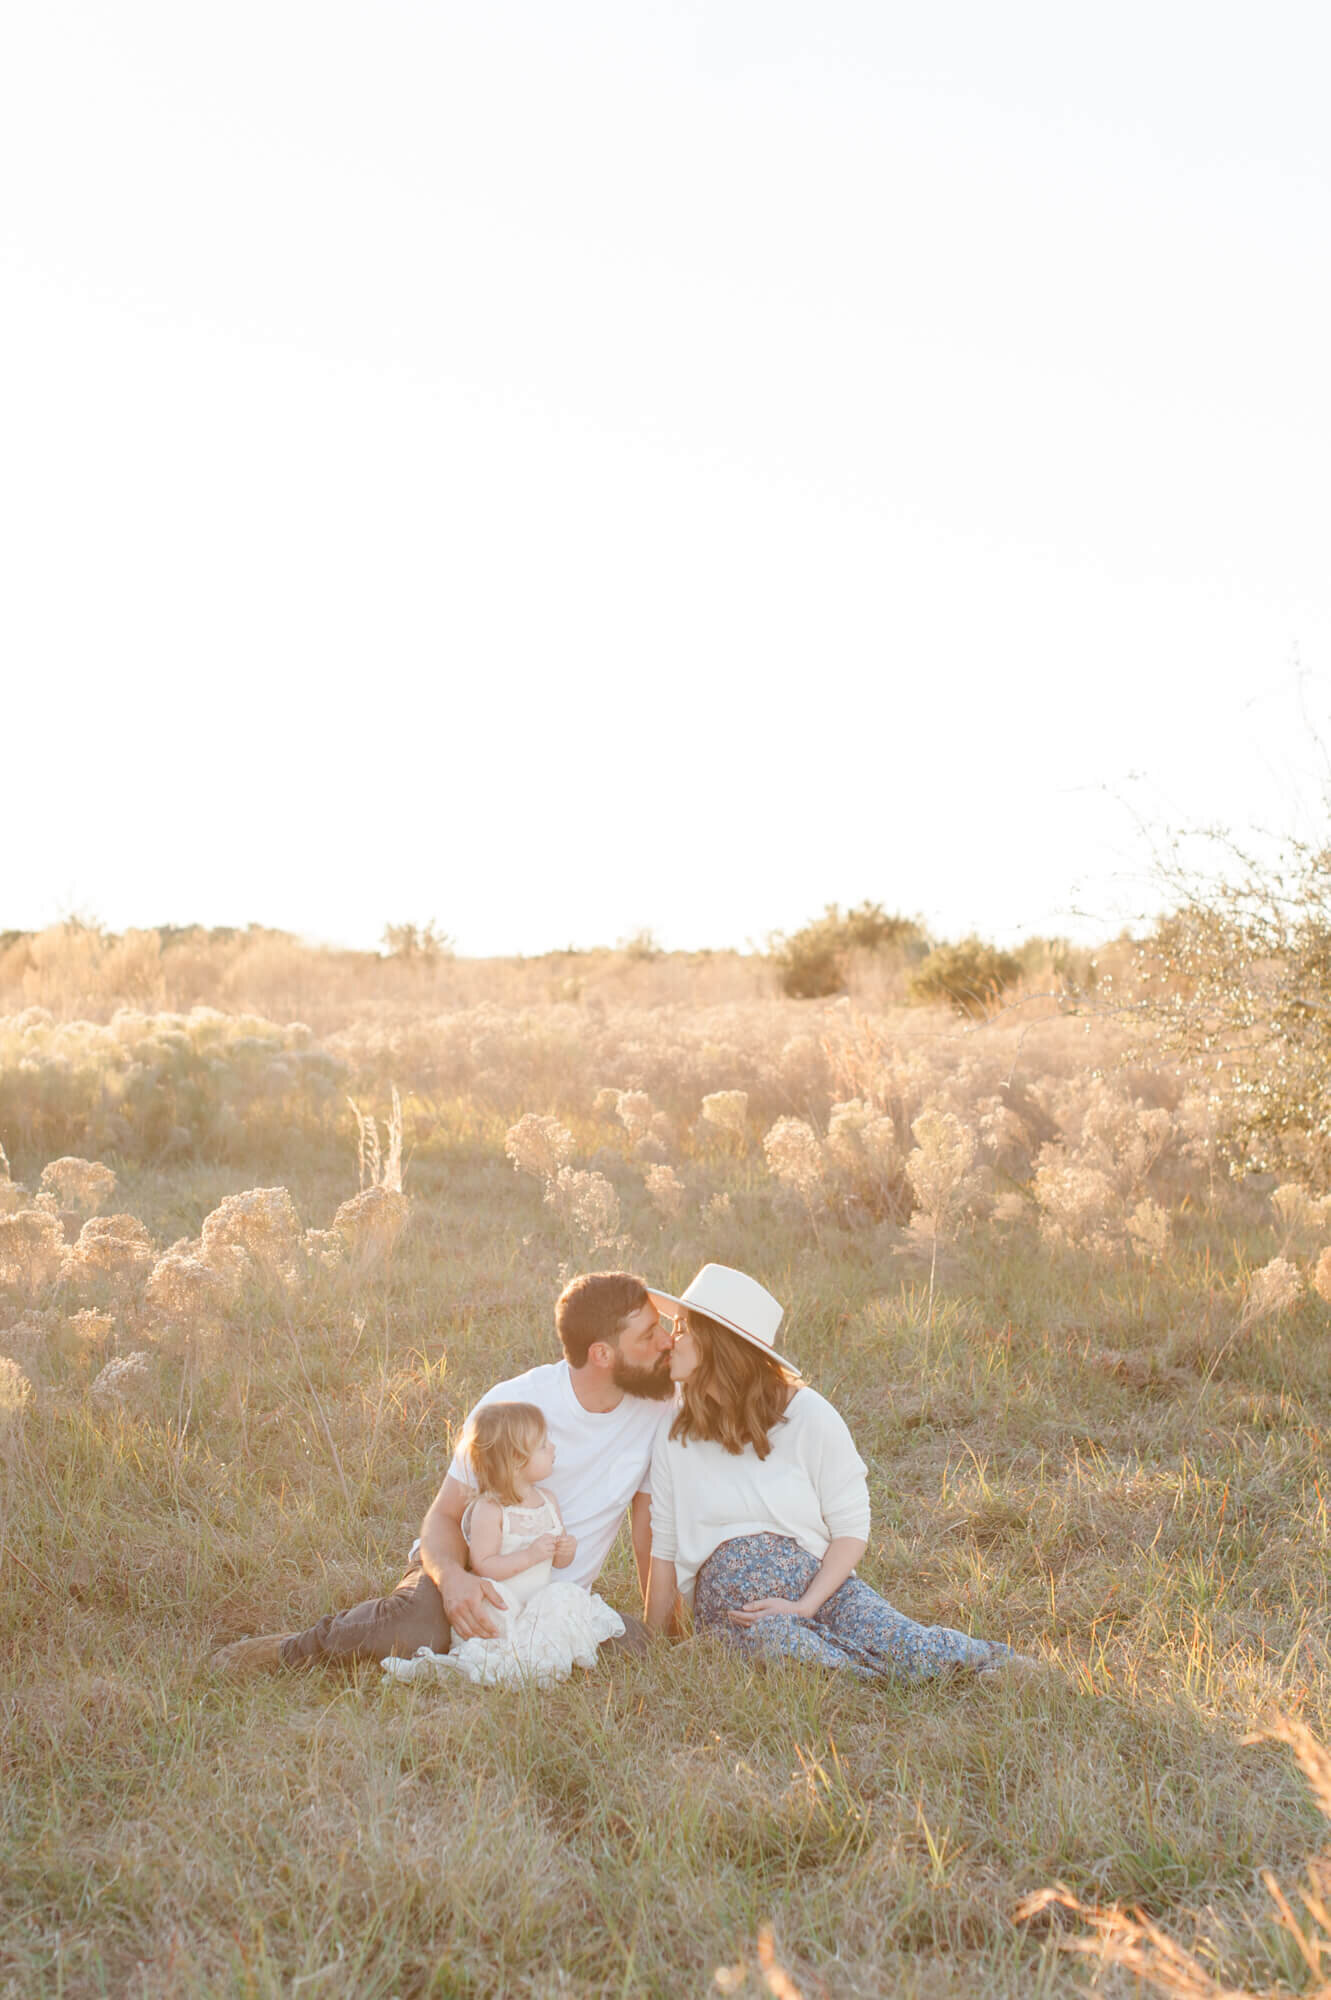 Pregnant couple kissing in a tall grass field while holding their young daughter during golden hour